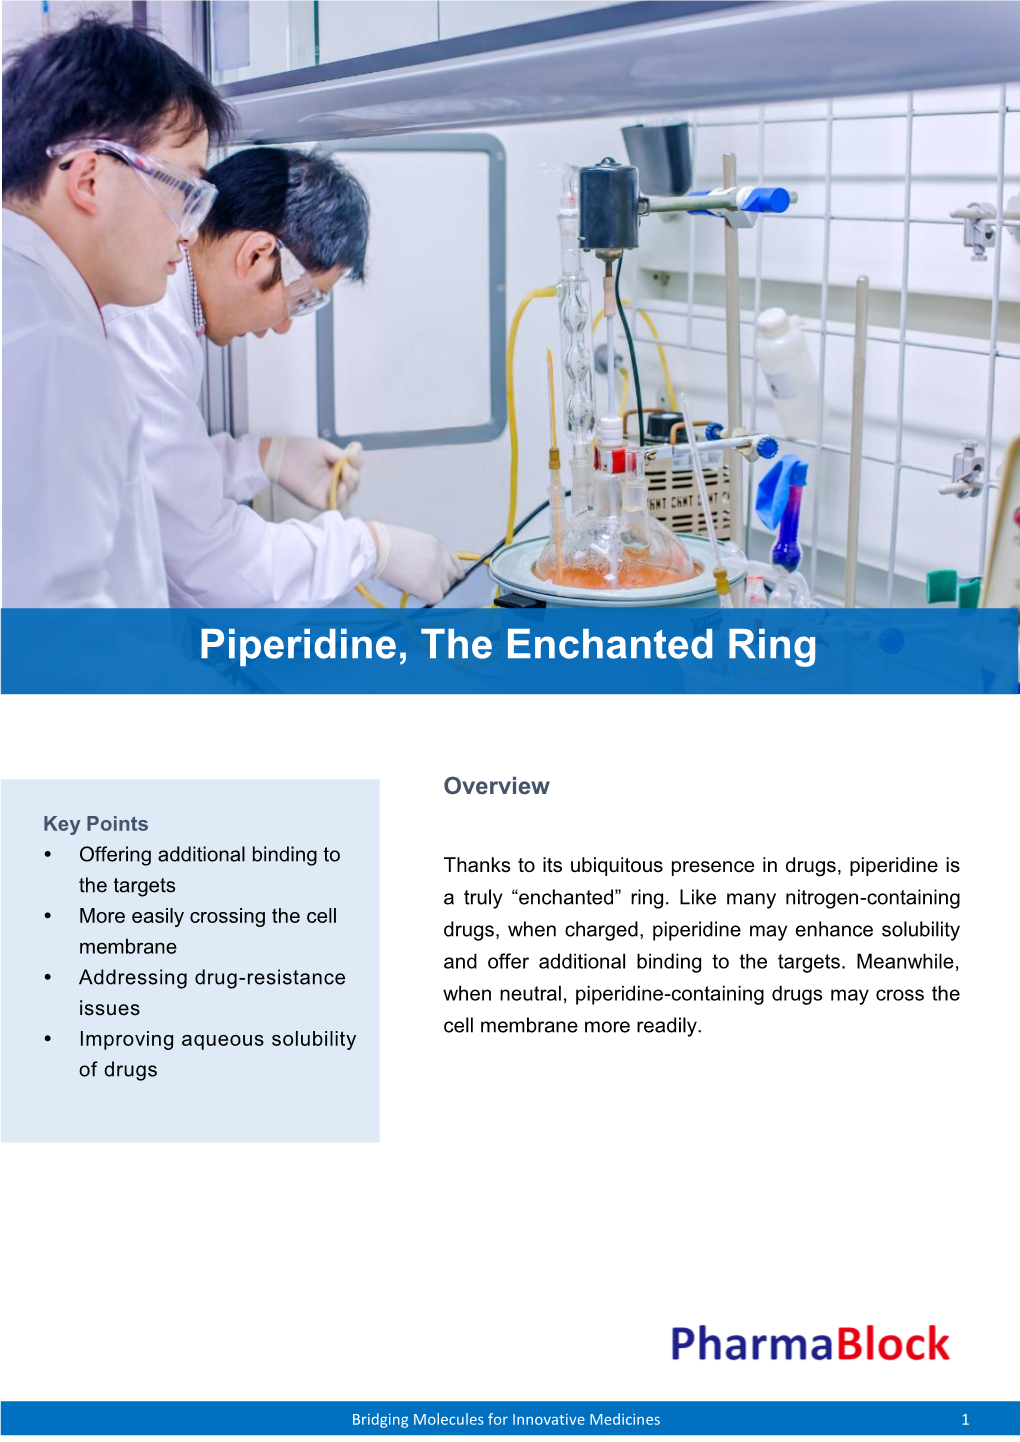 Piperidine, the Enchanted Ring